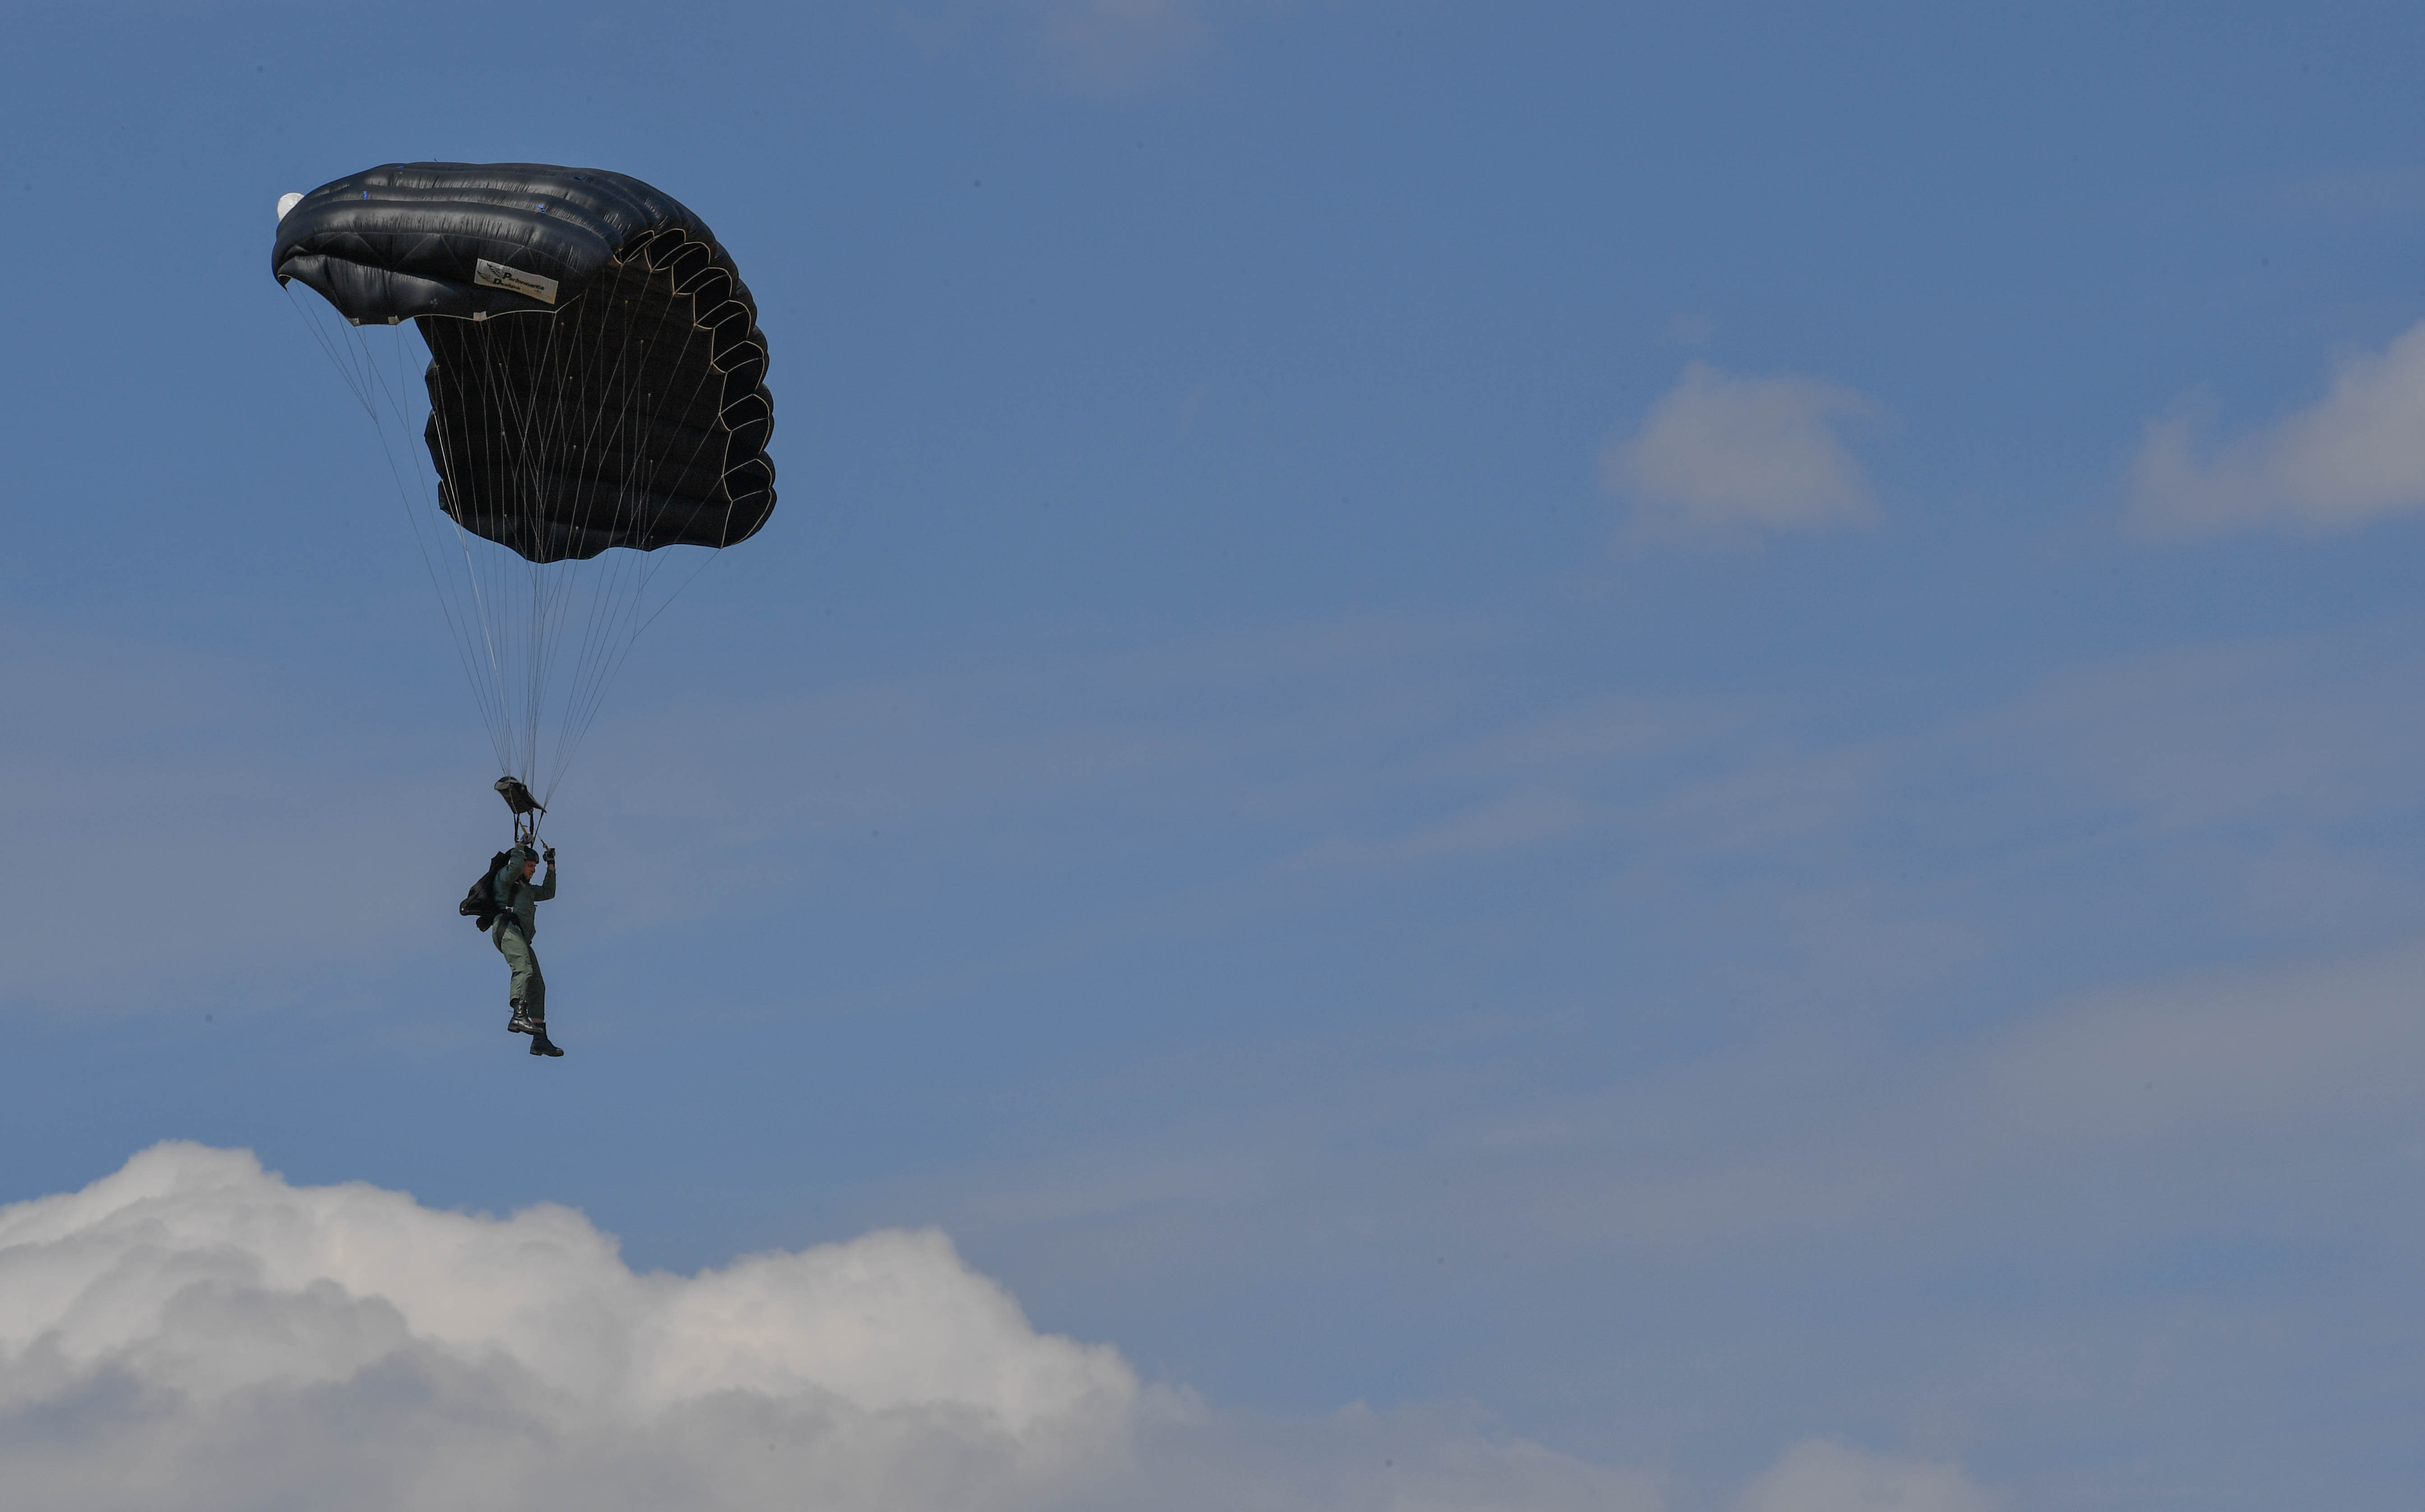 A Greek paratrooper descends to the ground after conducting a military free fall jump from a U.S. Air Force C-130J Super Hercules during Exercise Stolen Cerberus IV above Megara, Greece, April 22, 2017. The U.S. Air Force and Army have worked alongside the Hellenic air force to perform personnel and cargo drops throughout the exercise. These interoperability air exercises help to maintain joint readiness. (U.S Air Force photo by Senior Airman Tryphena Mayhugh)